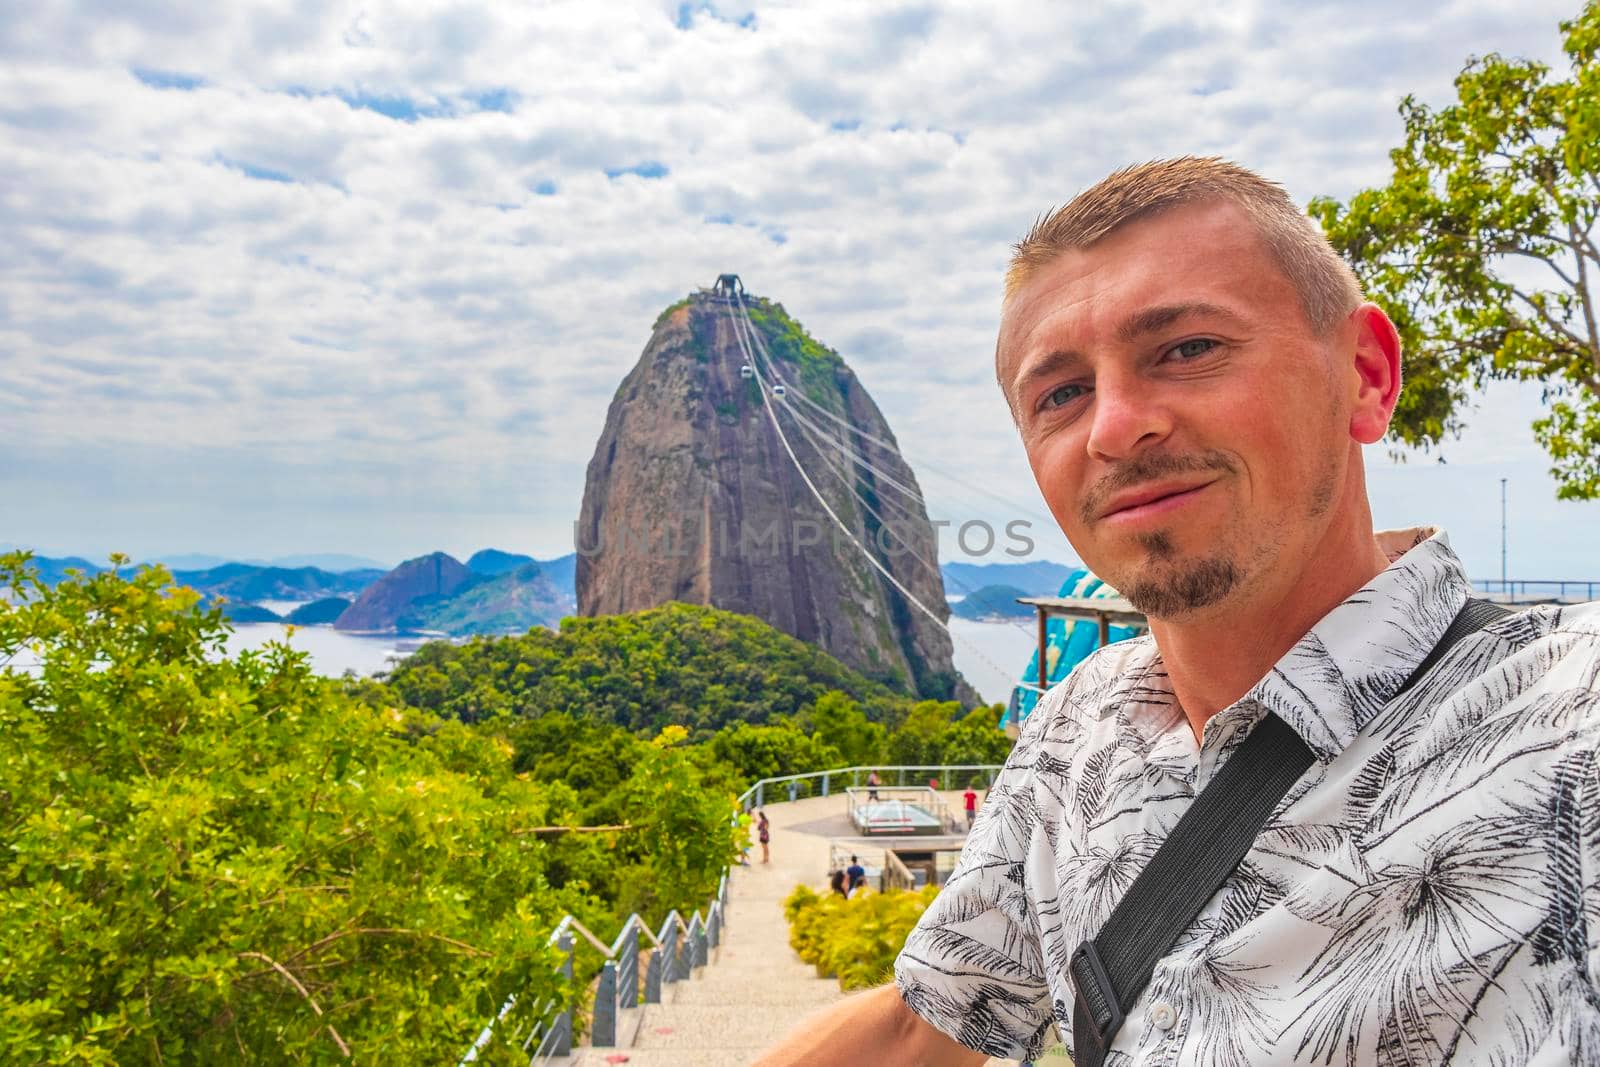 Tourist traveler is posing at the Sugarloaf sugar loaf mountain Pão de Açucar with cable car panorama view in the Urca village in Rio de Janeiro Brazil.